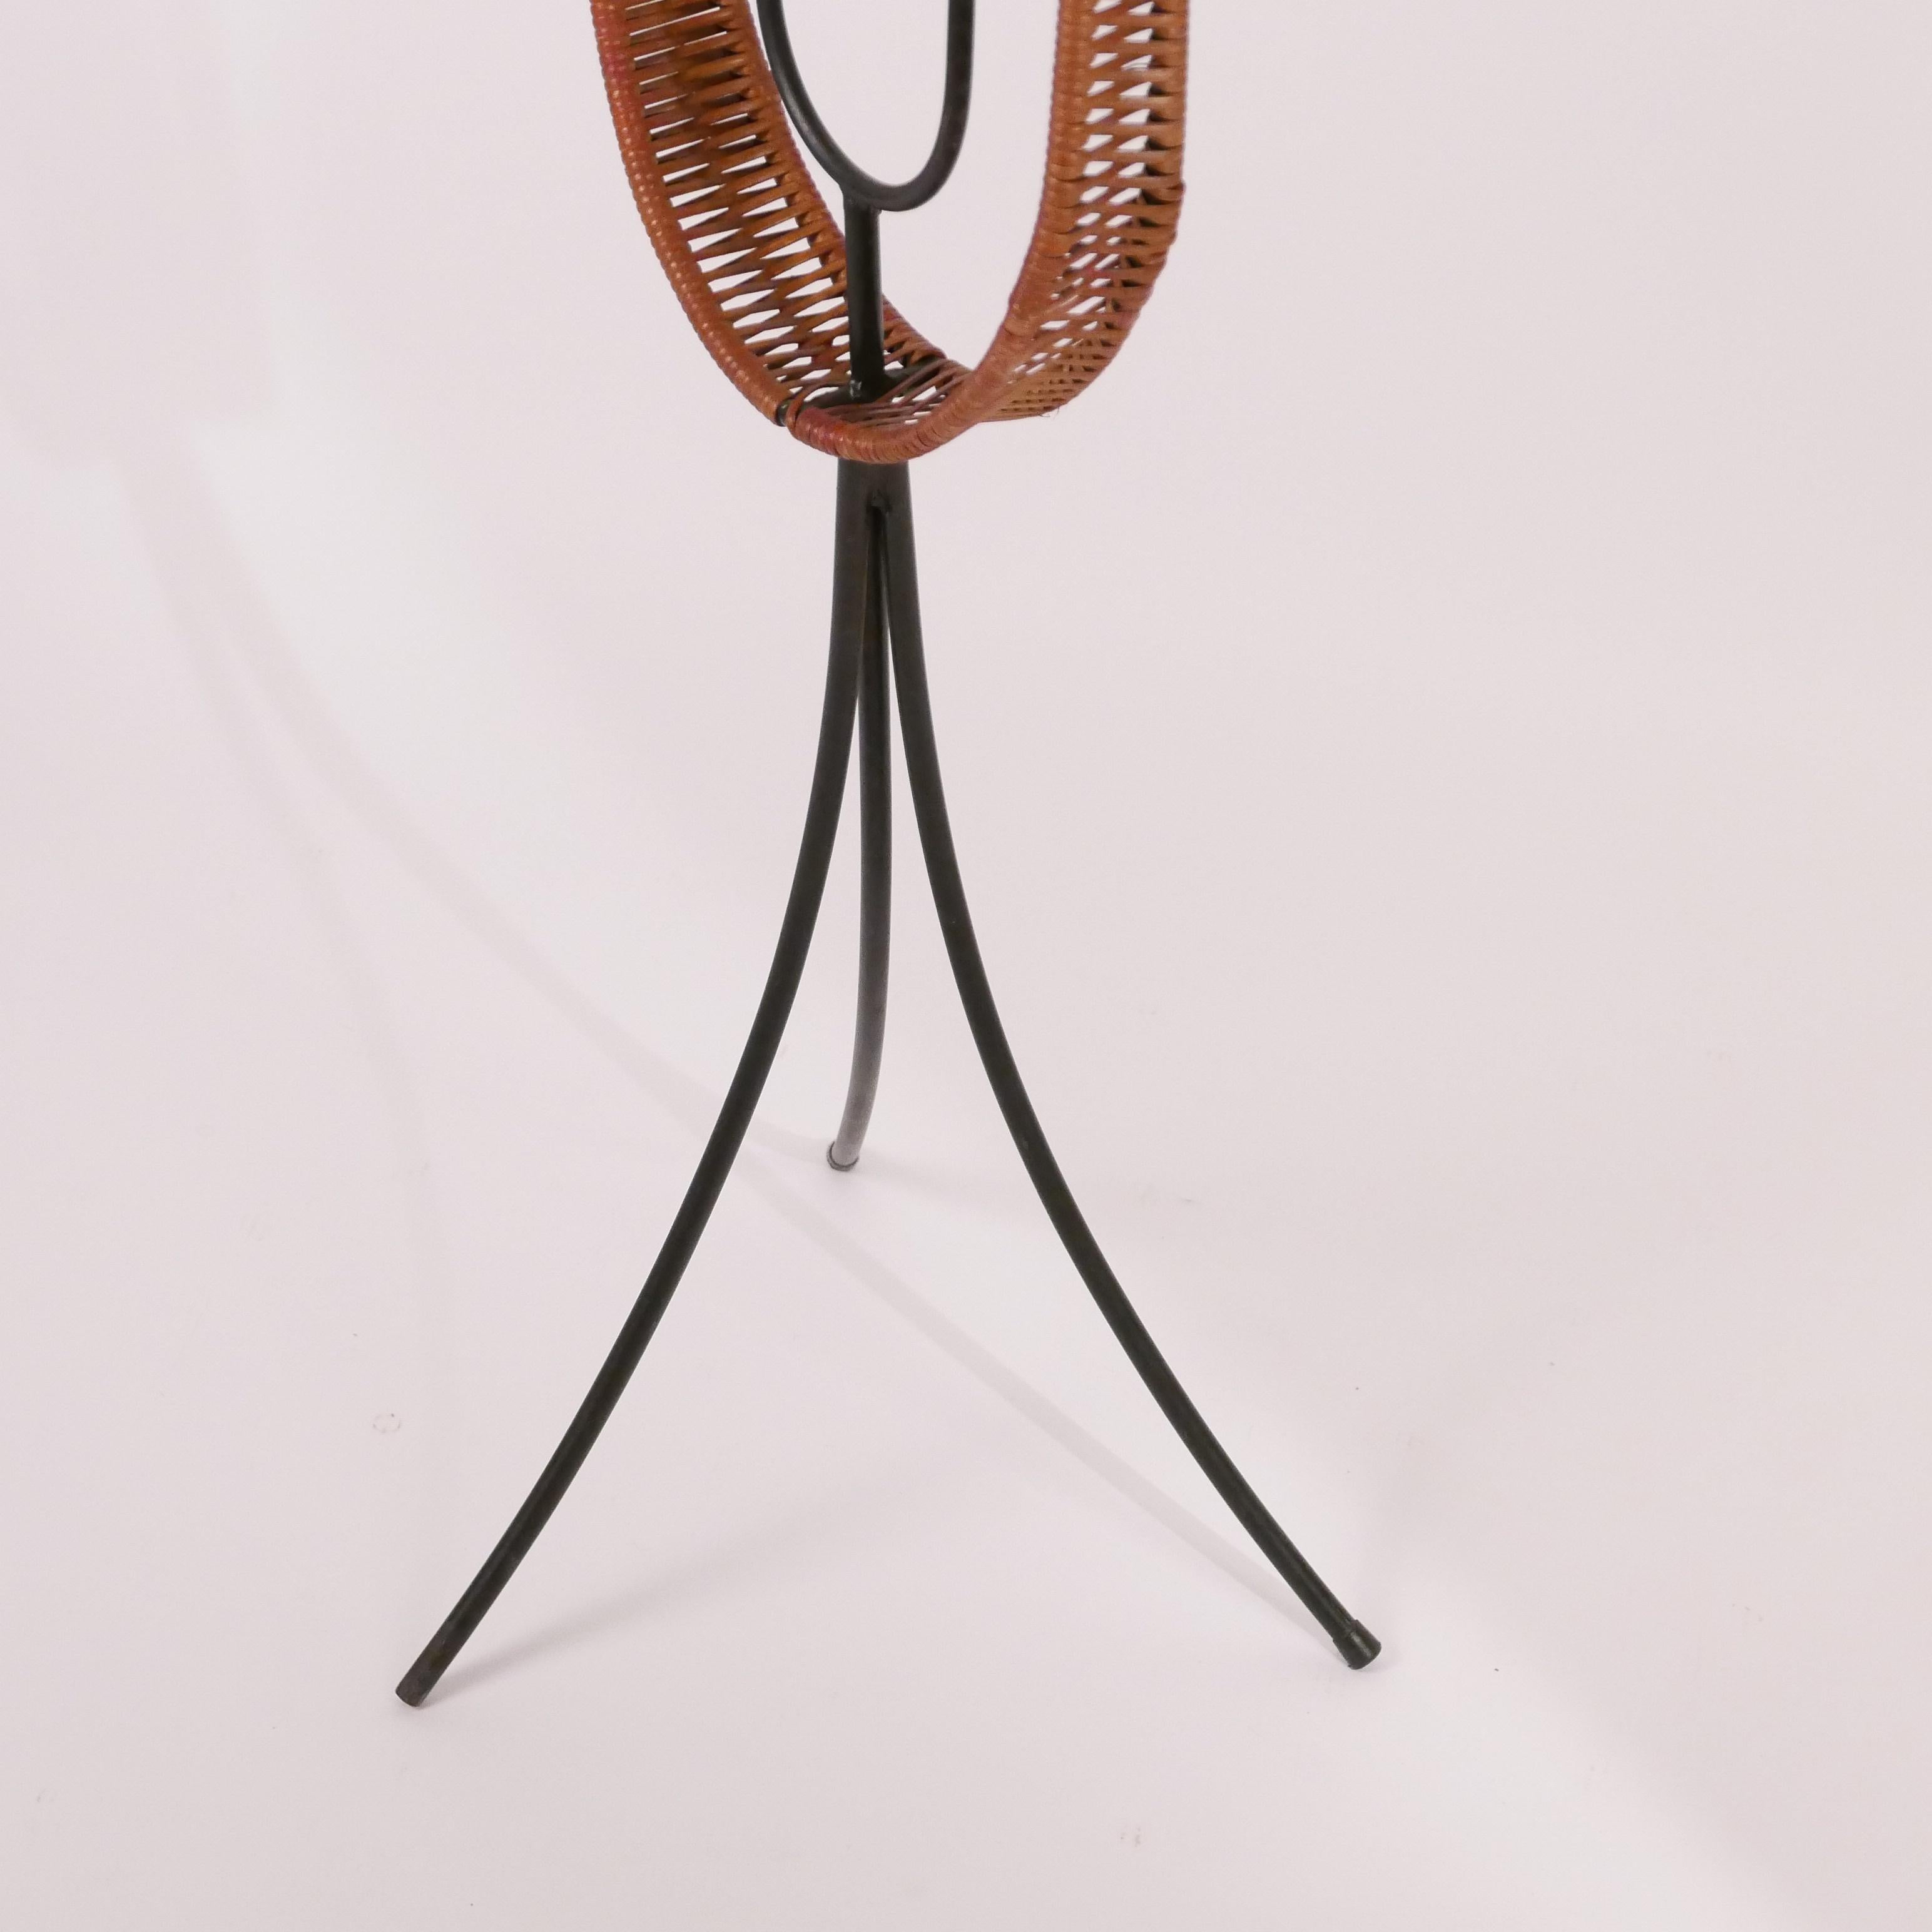 Metal Wrought Iron and Cane Mid-Century Modern Candelabra Torchère by Arthur Umanoff